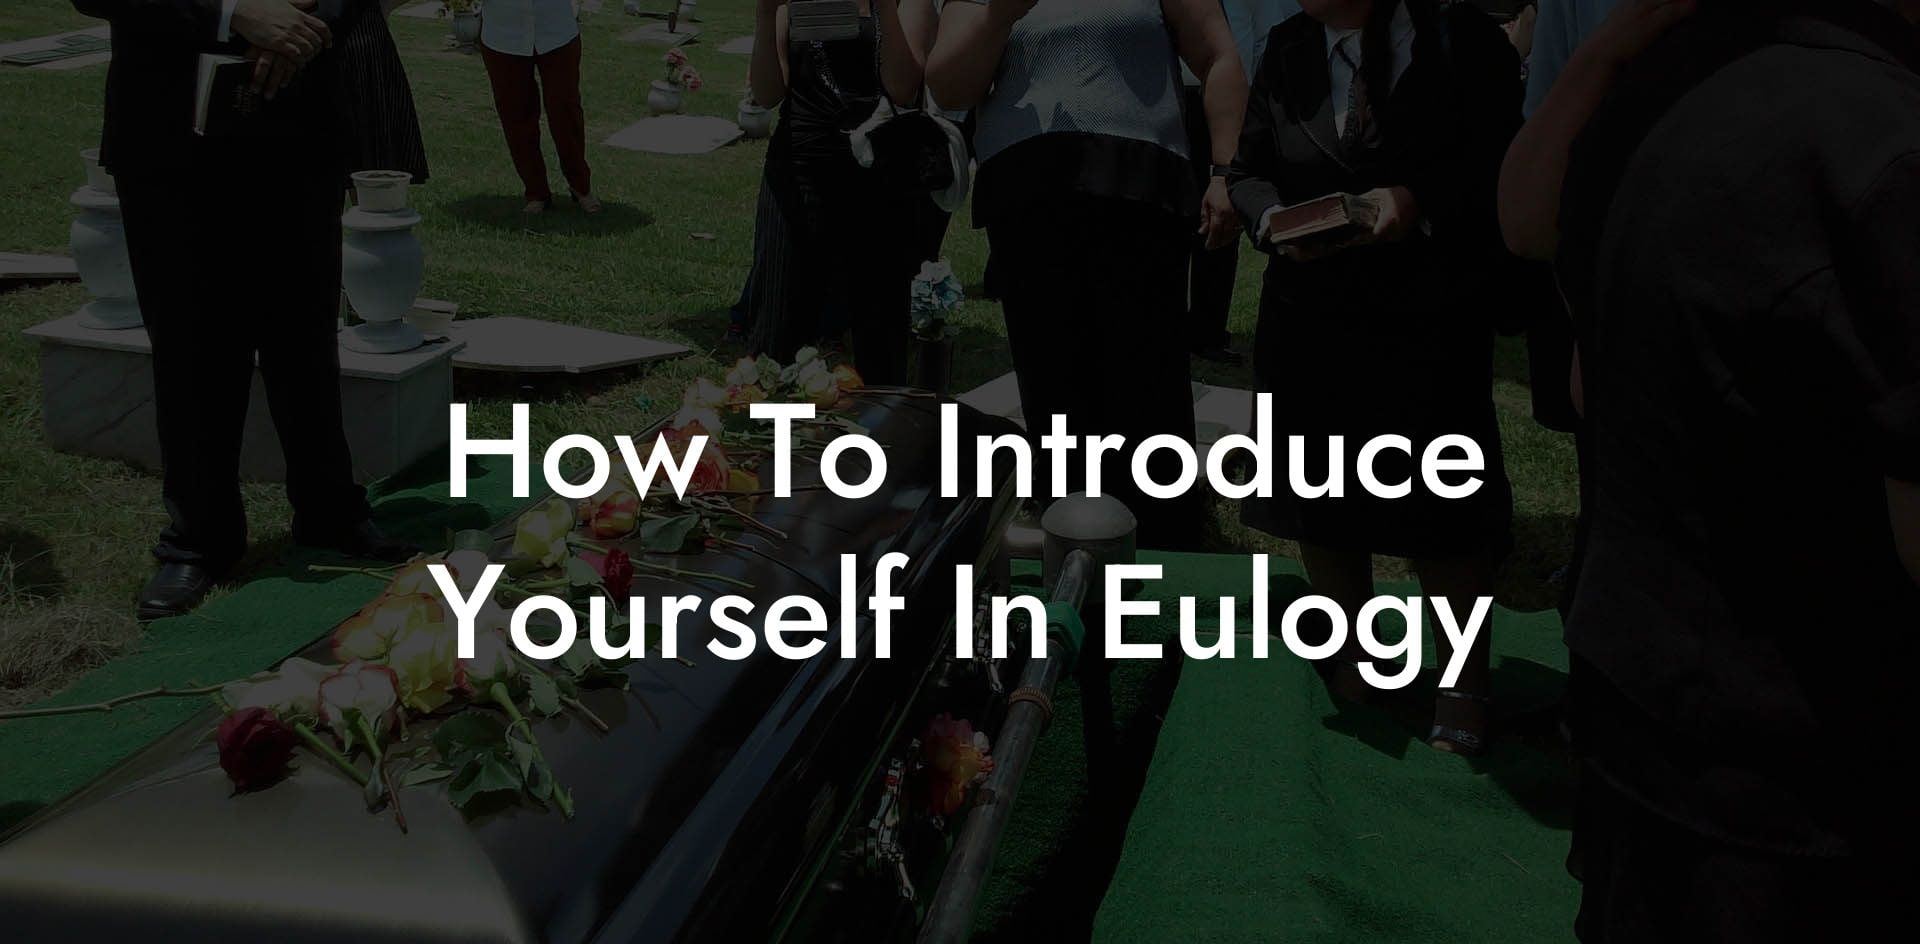 How To Introduce Yourself In Eulogy